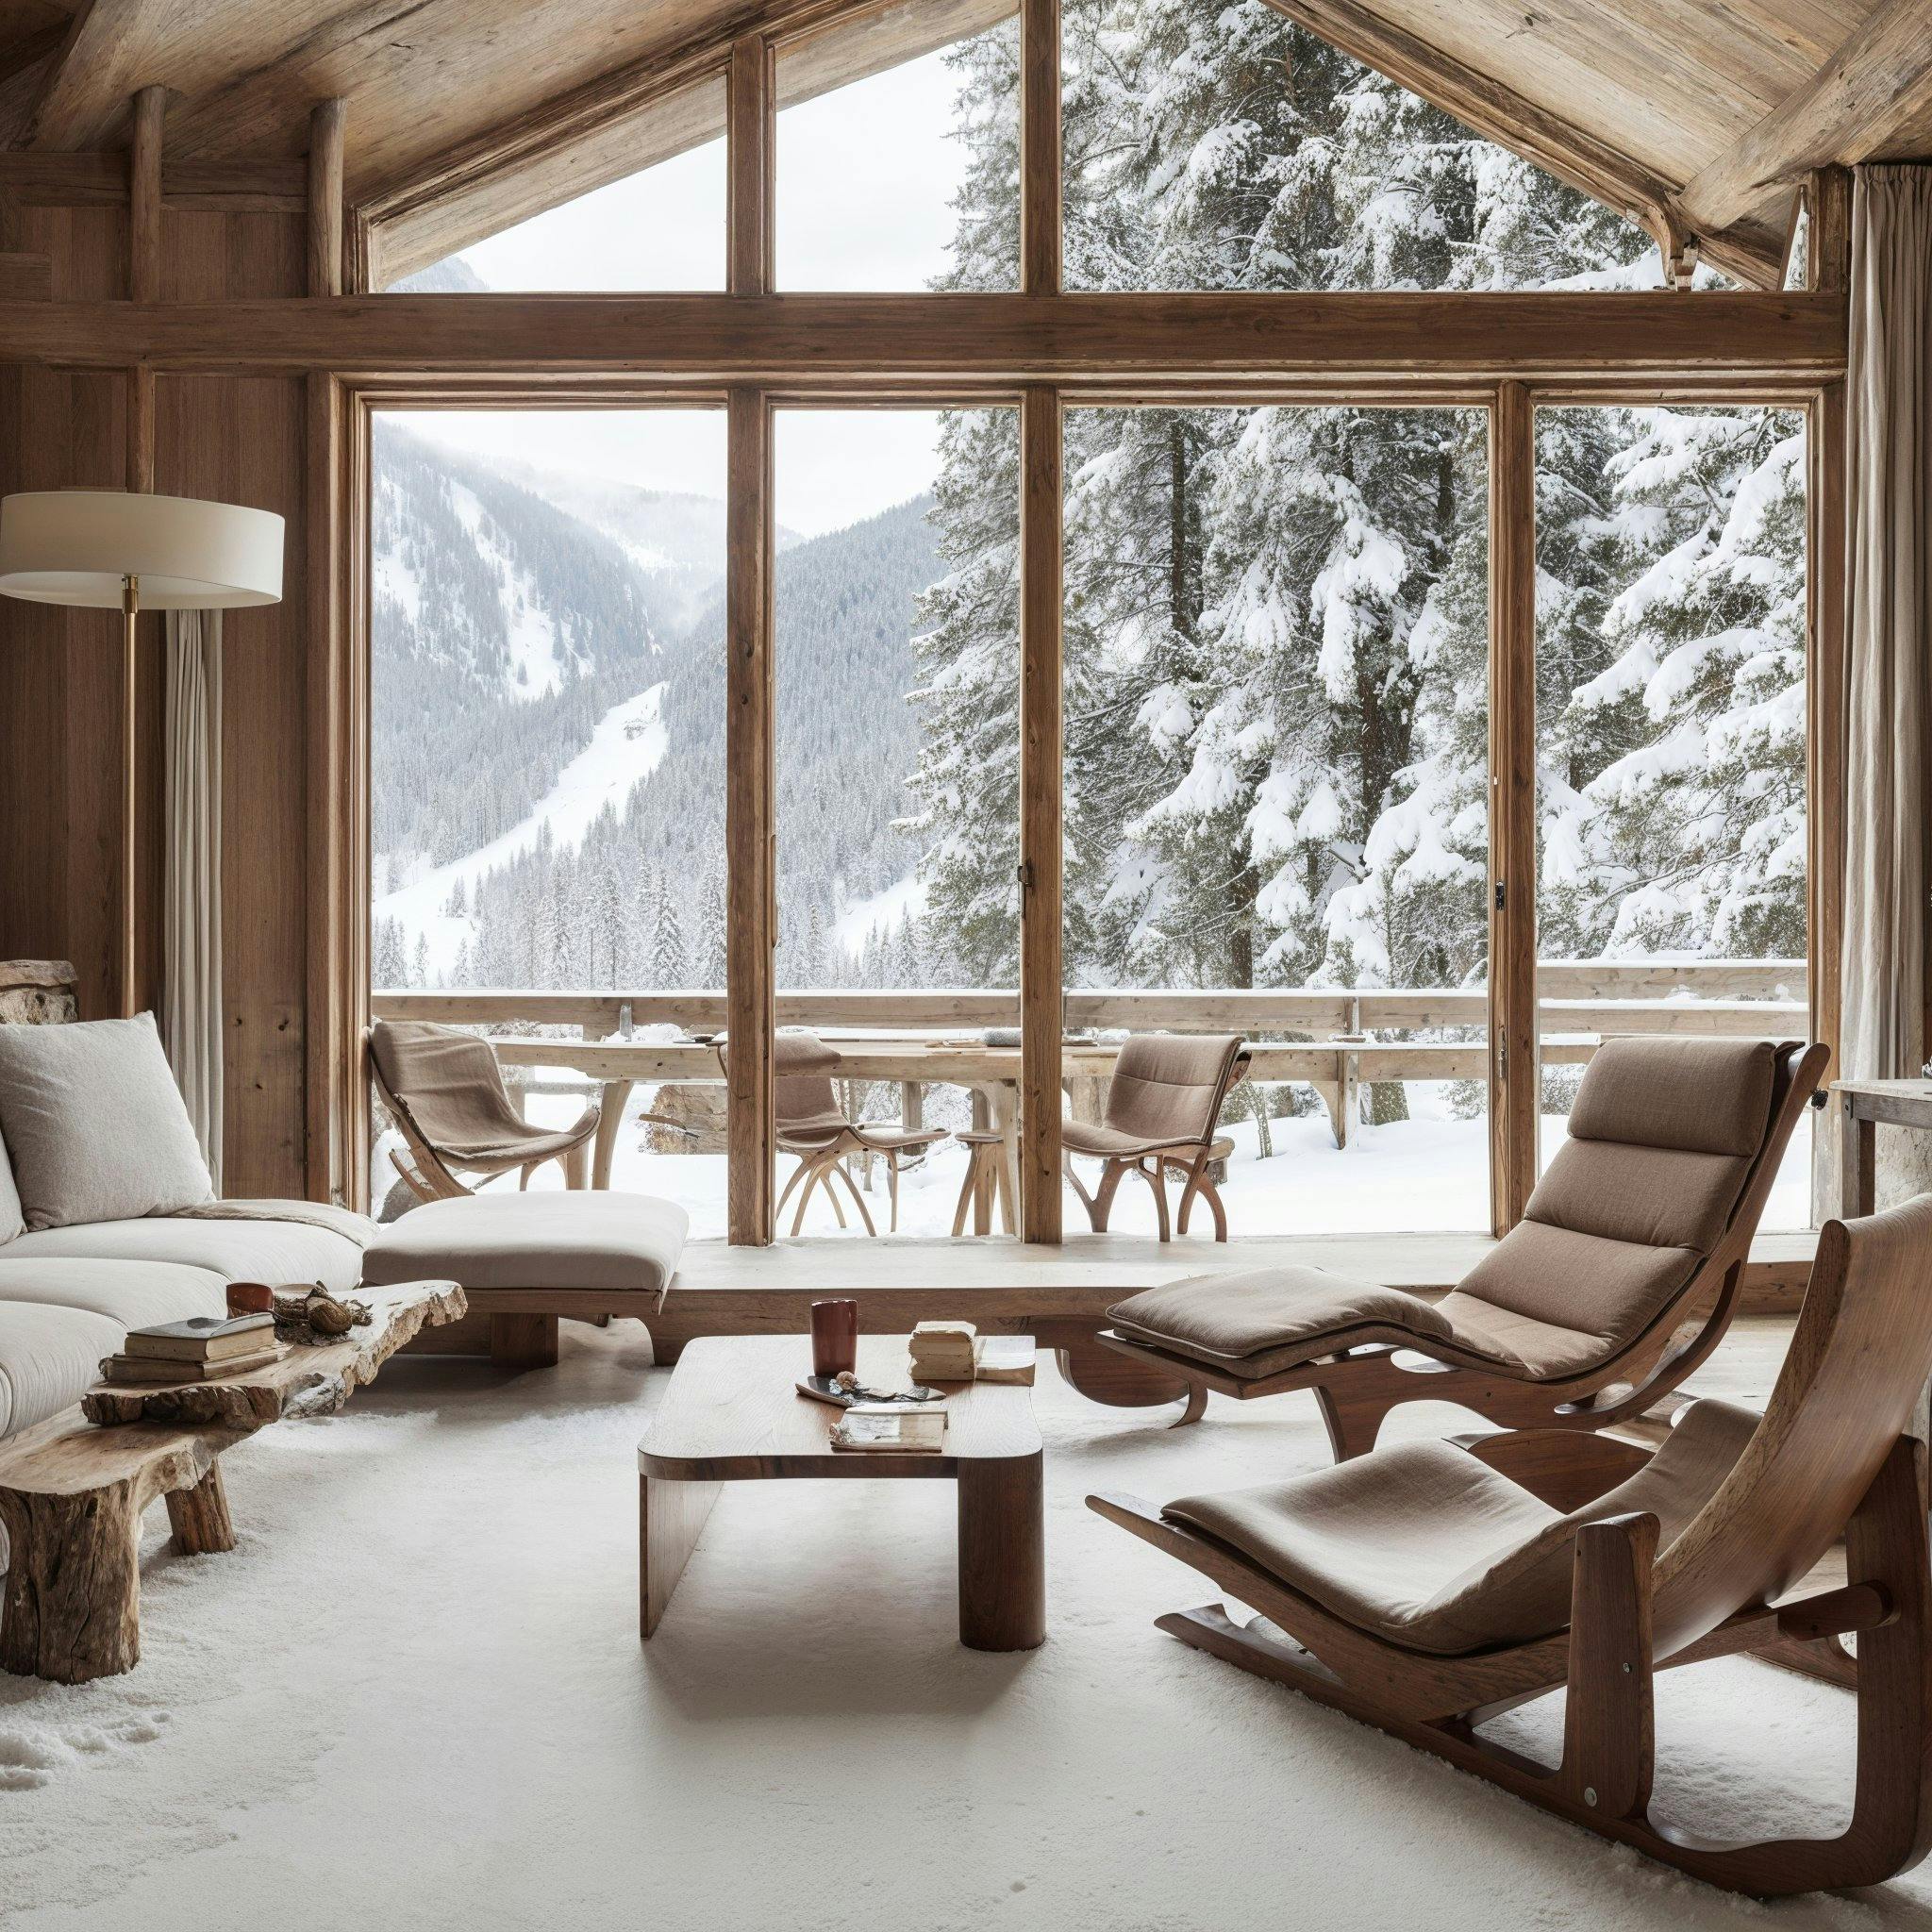 What if we imagine a Scene with a mountain lodge where the design embraces the raw beauty of its alpine setting?